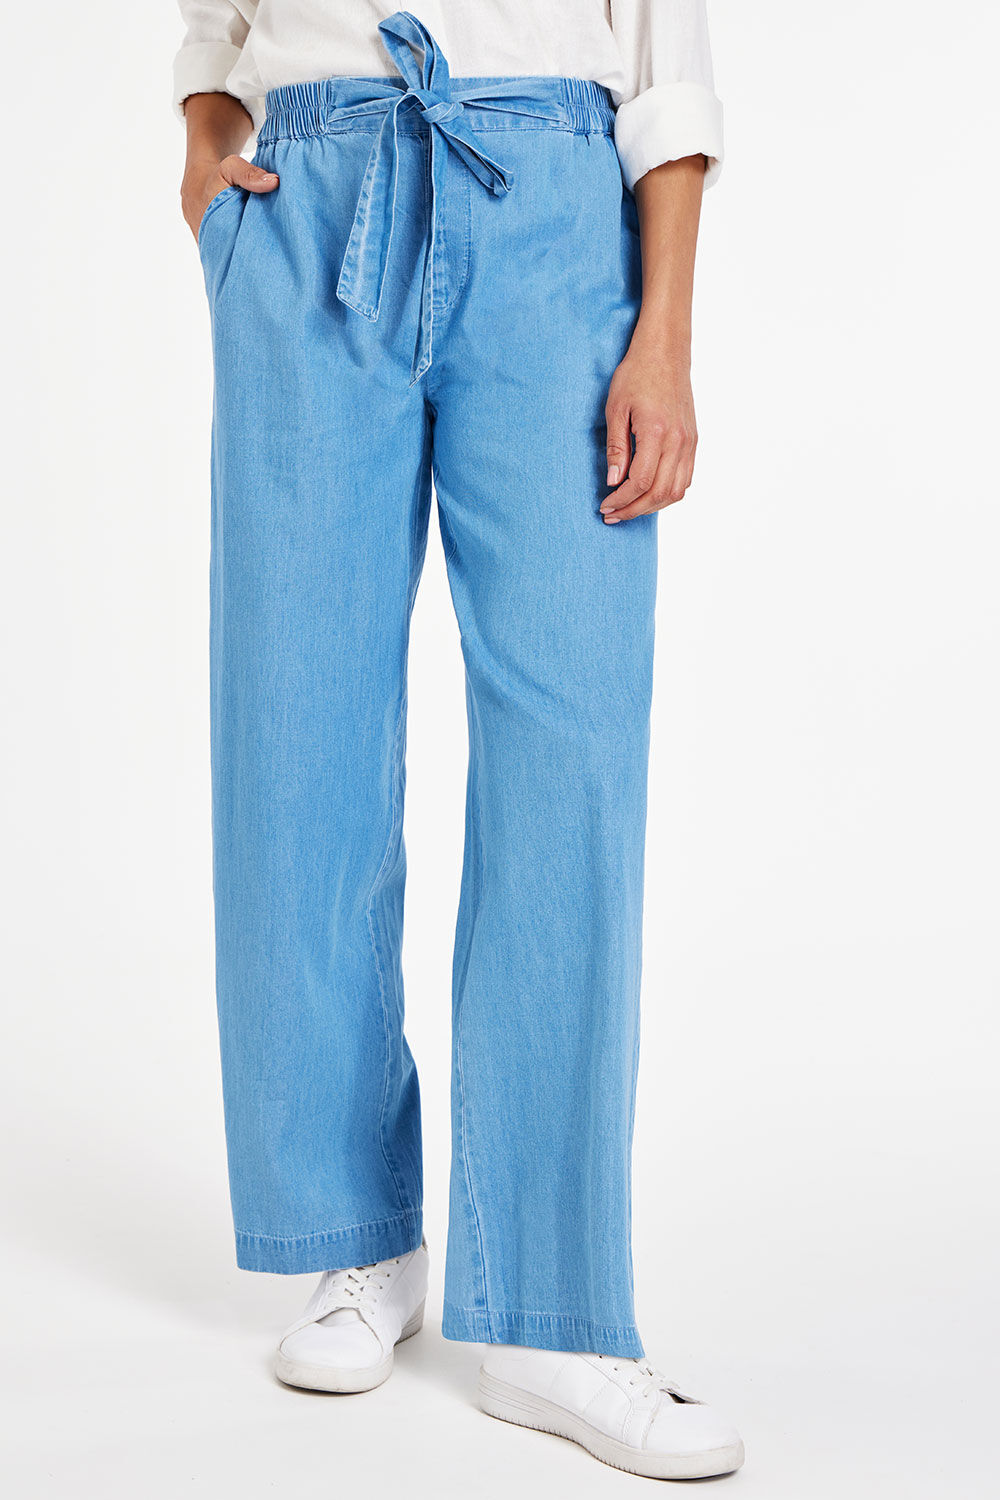 Buy AND Natural Solid Loose Fit Polyester Womens Trousers | Shoppers Stop